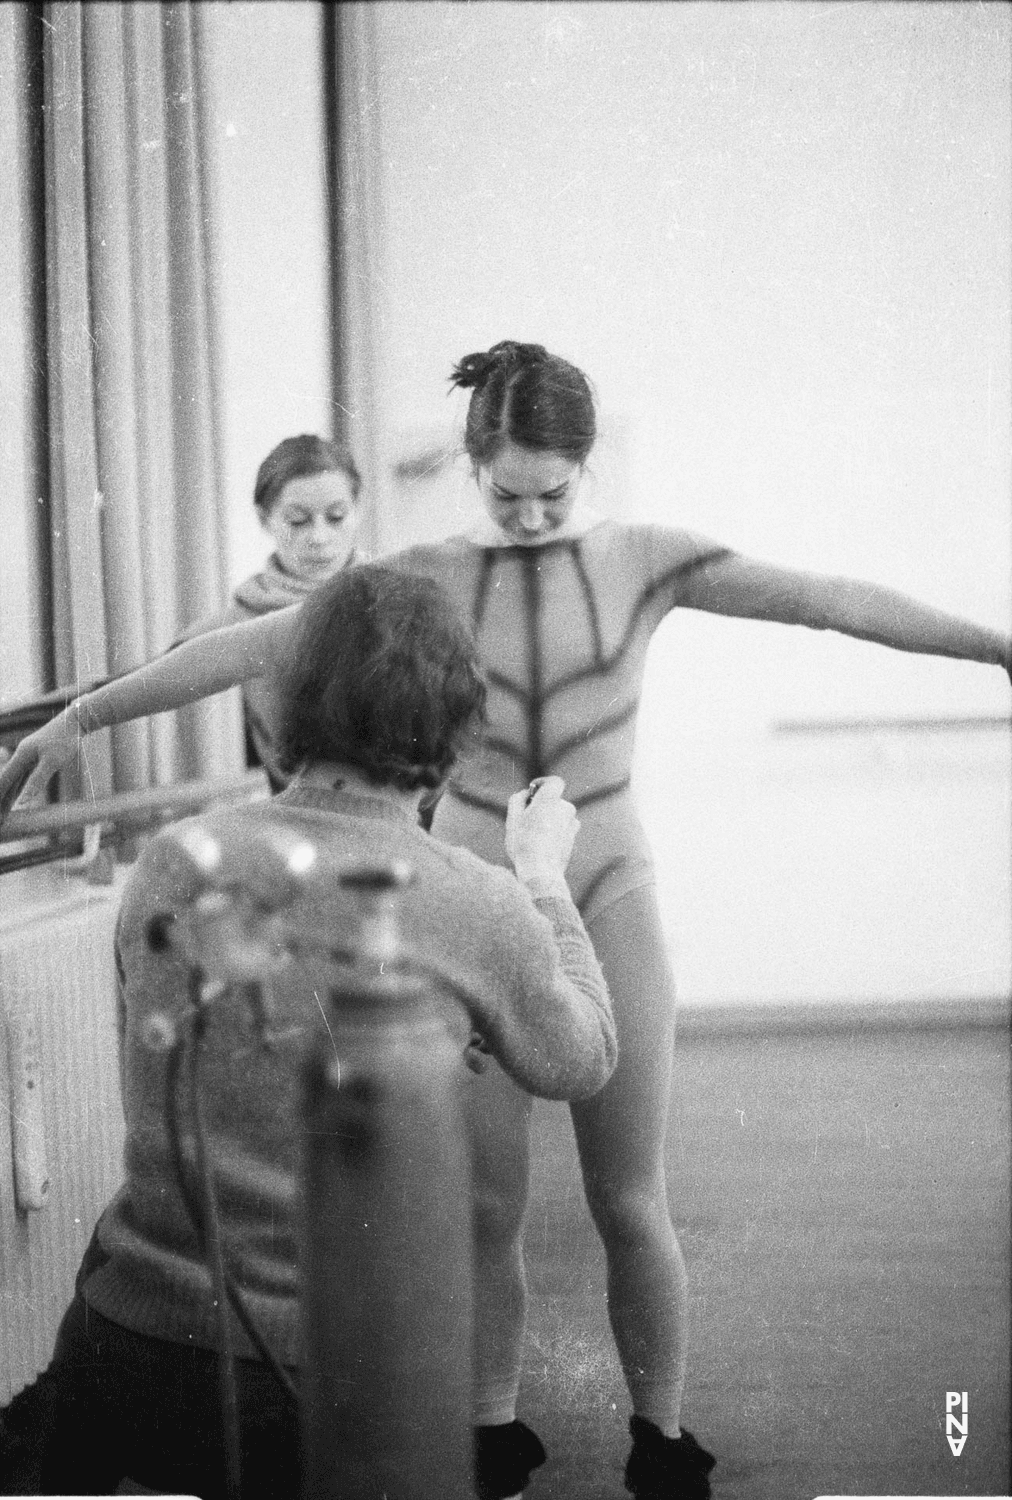 Christian Piper, Fridel Deharde and Erika Fabry in “Nachnull (After Zero)” by Pina Bausch